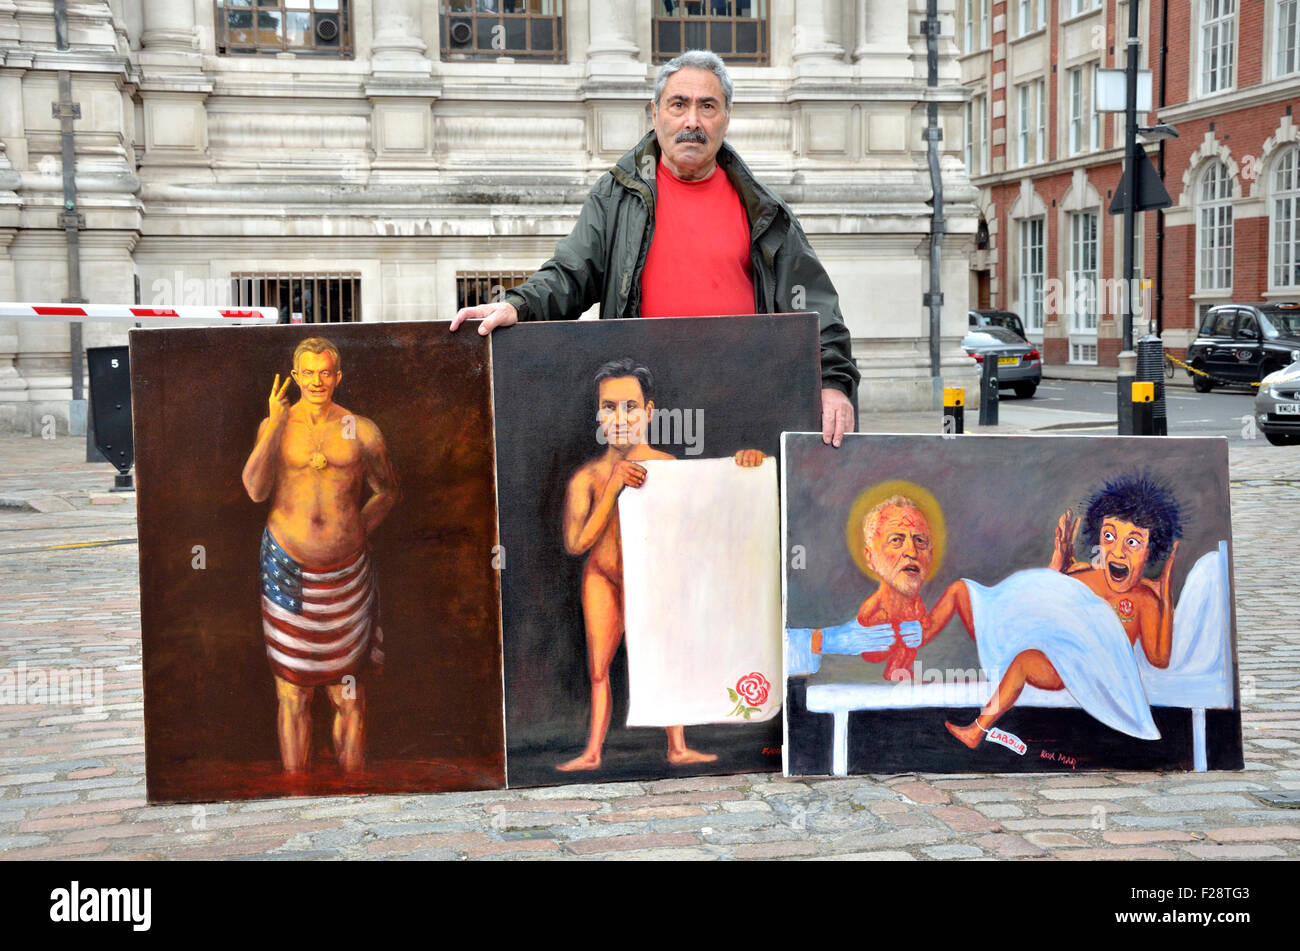 Kaya Mar, Turkish satirical cartoonist, with images of Labour leaders, outside the Queen Elizabeth II Conference Centre, London Stock Photo